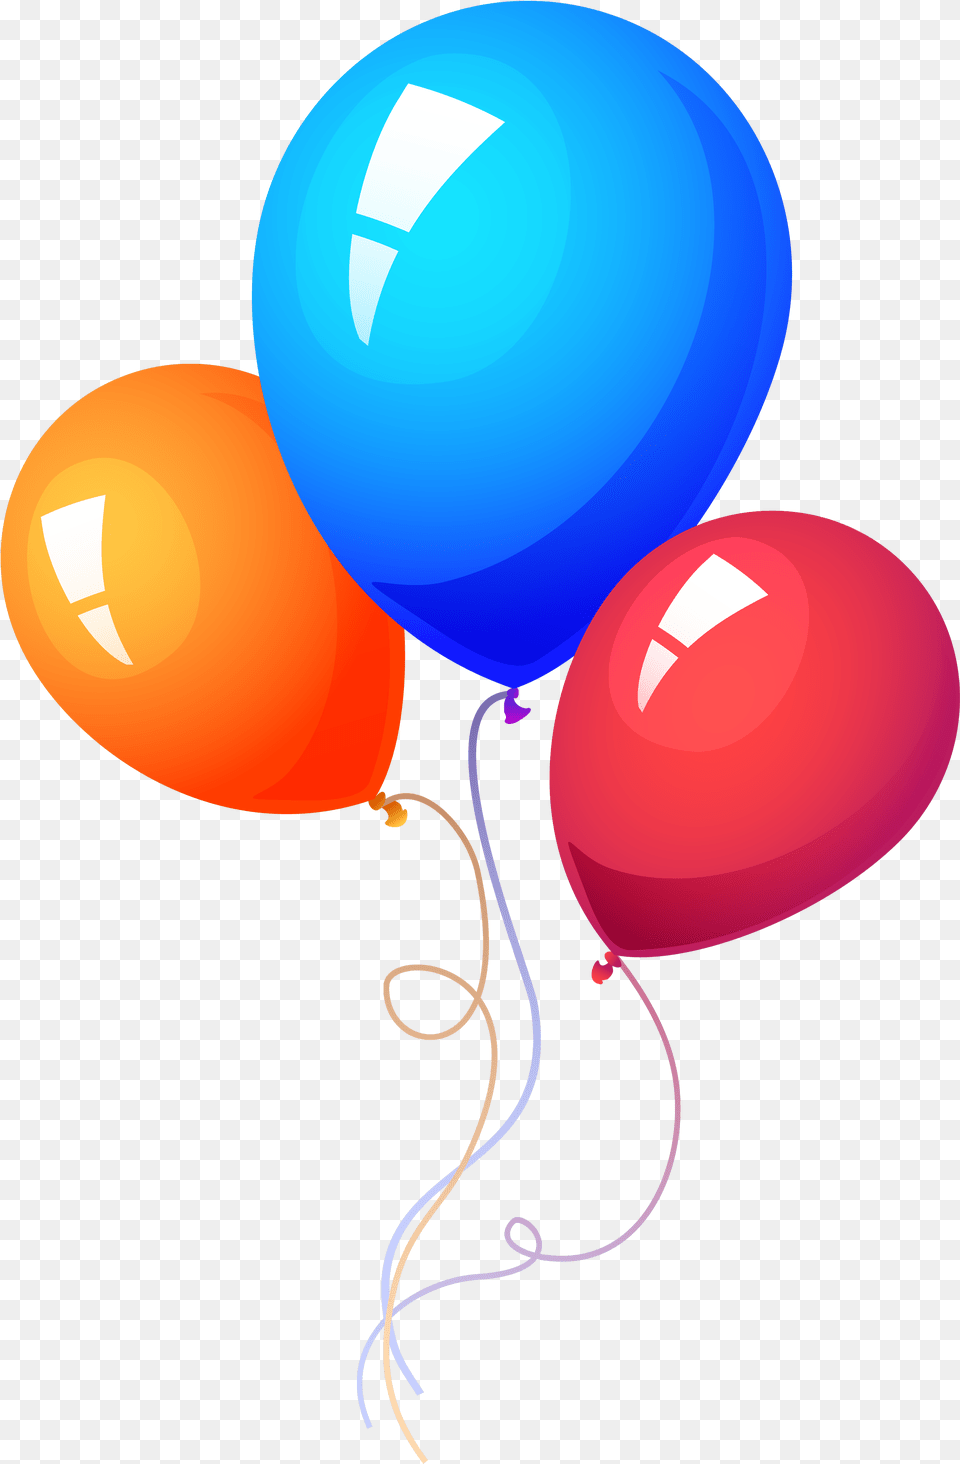 Party Ballons Background Balloon Png Image